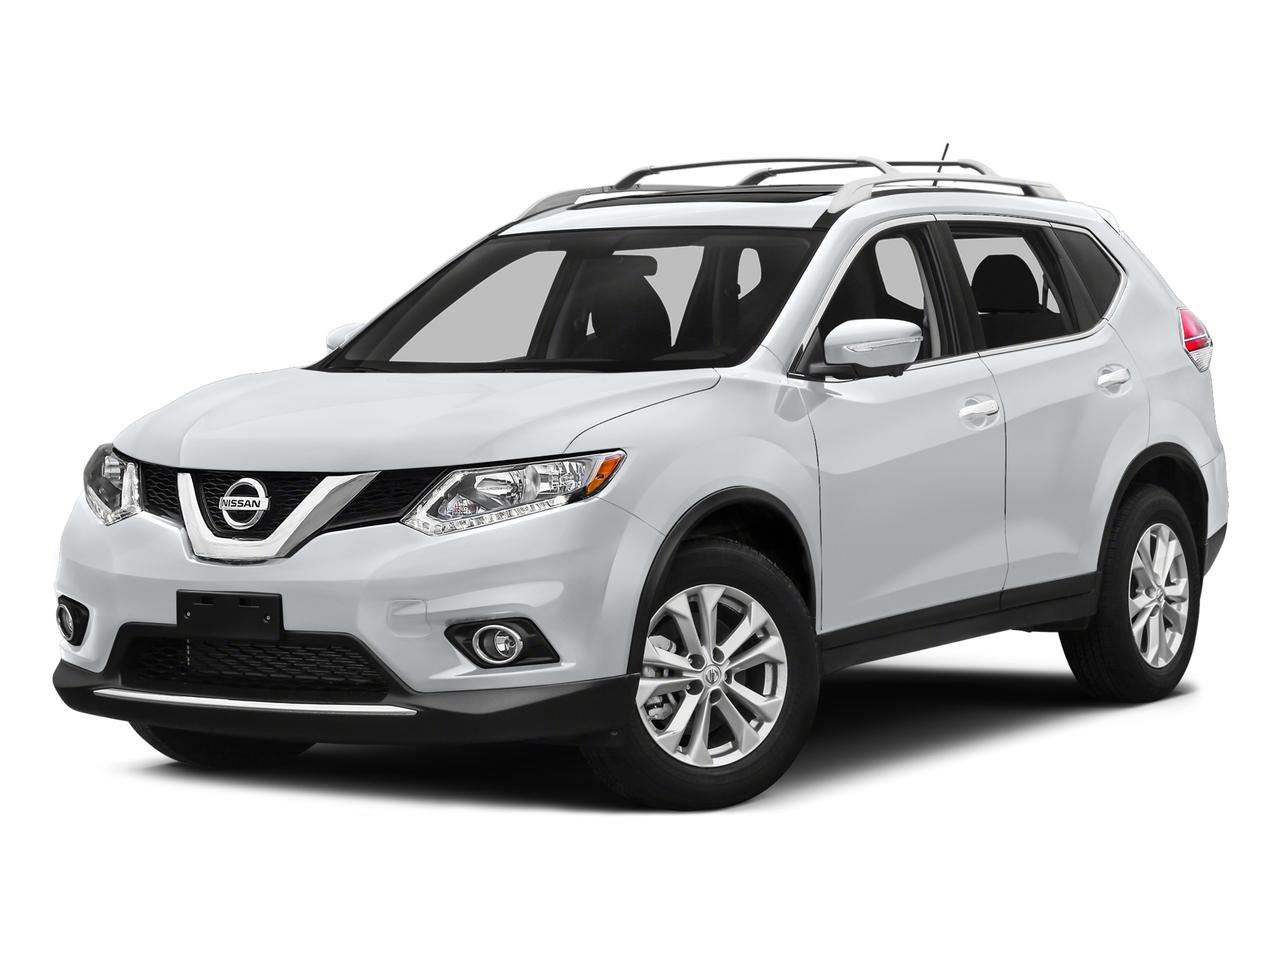 Used, Certified, Loaner Nissan Rogue Vehicles for Sale Reed Nissan